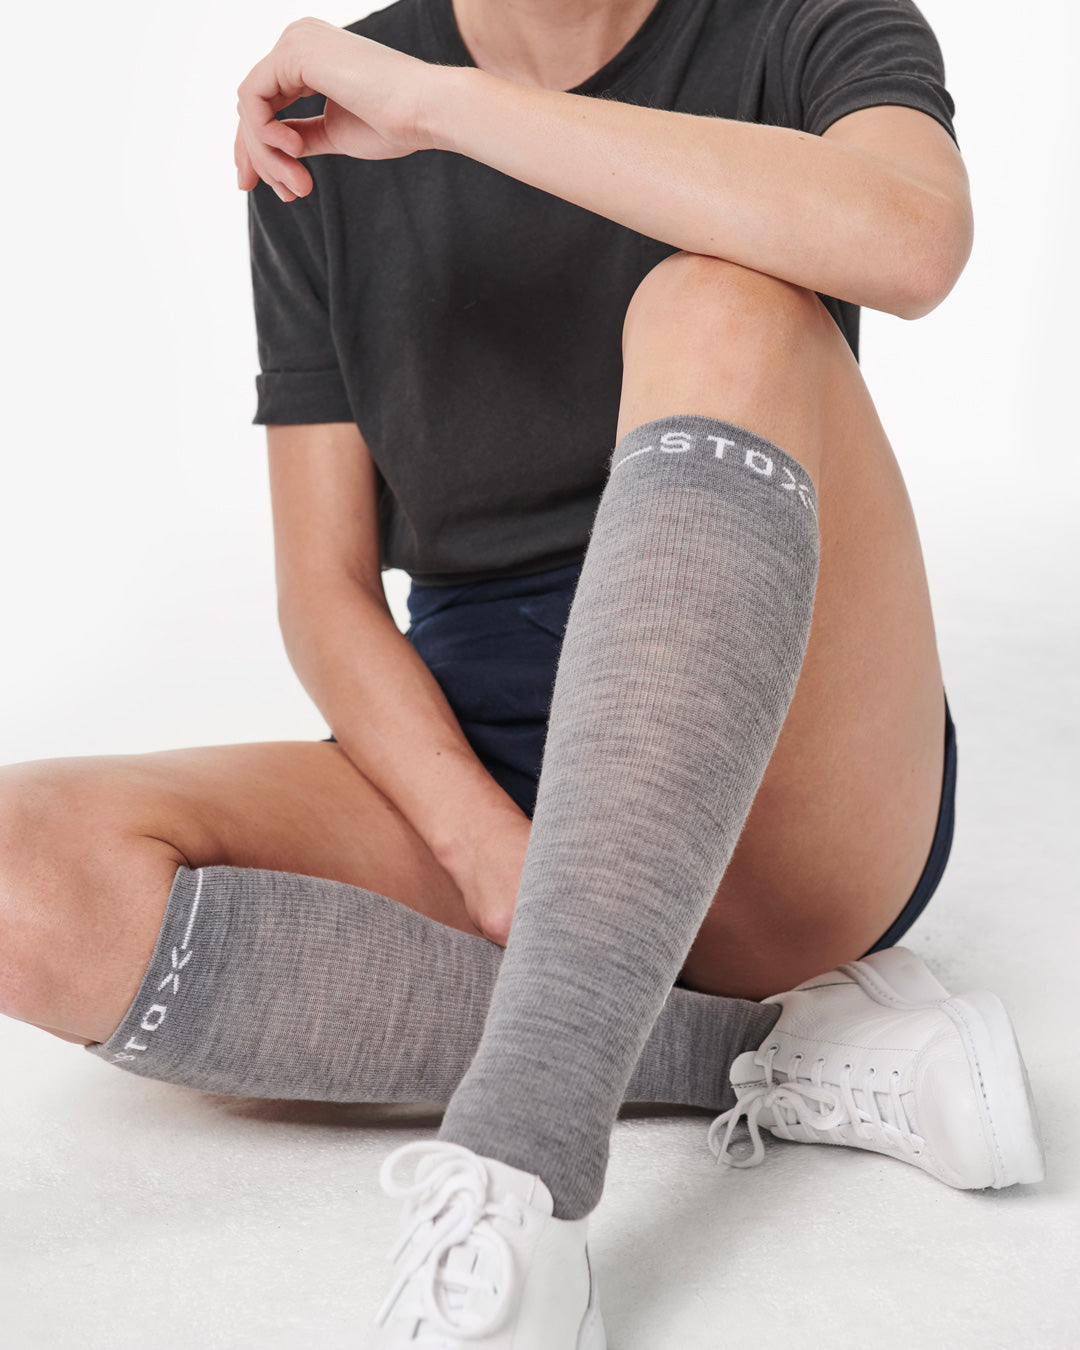 Sitting woman with compression socks.